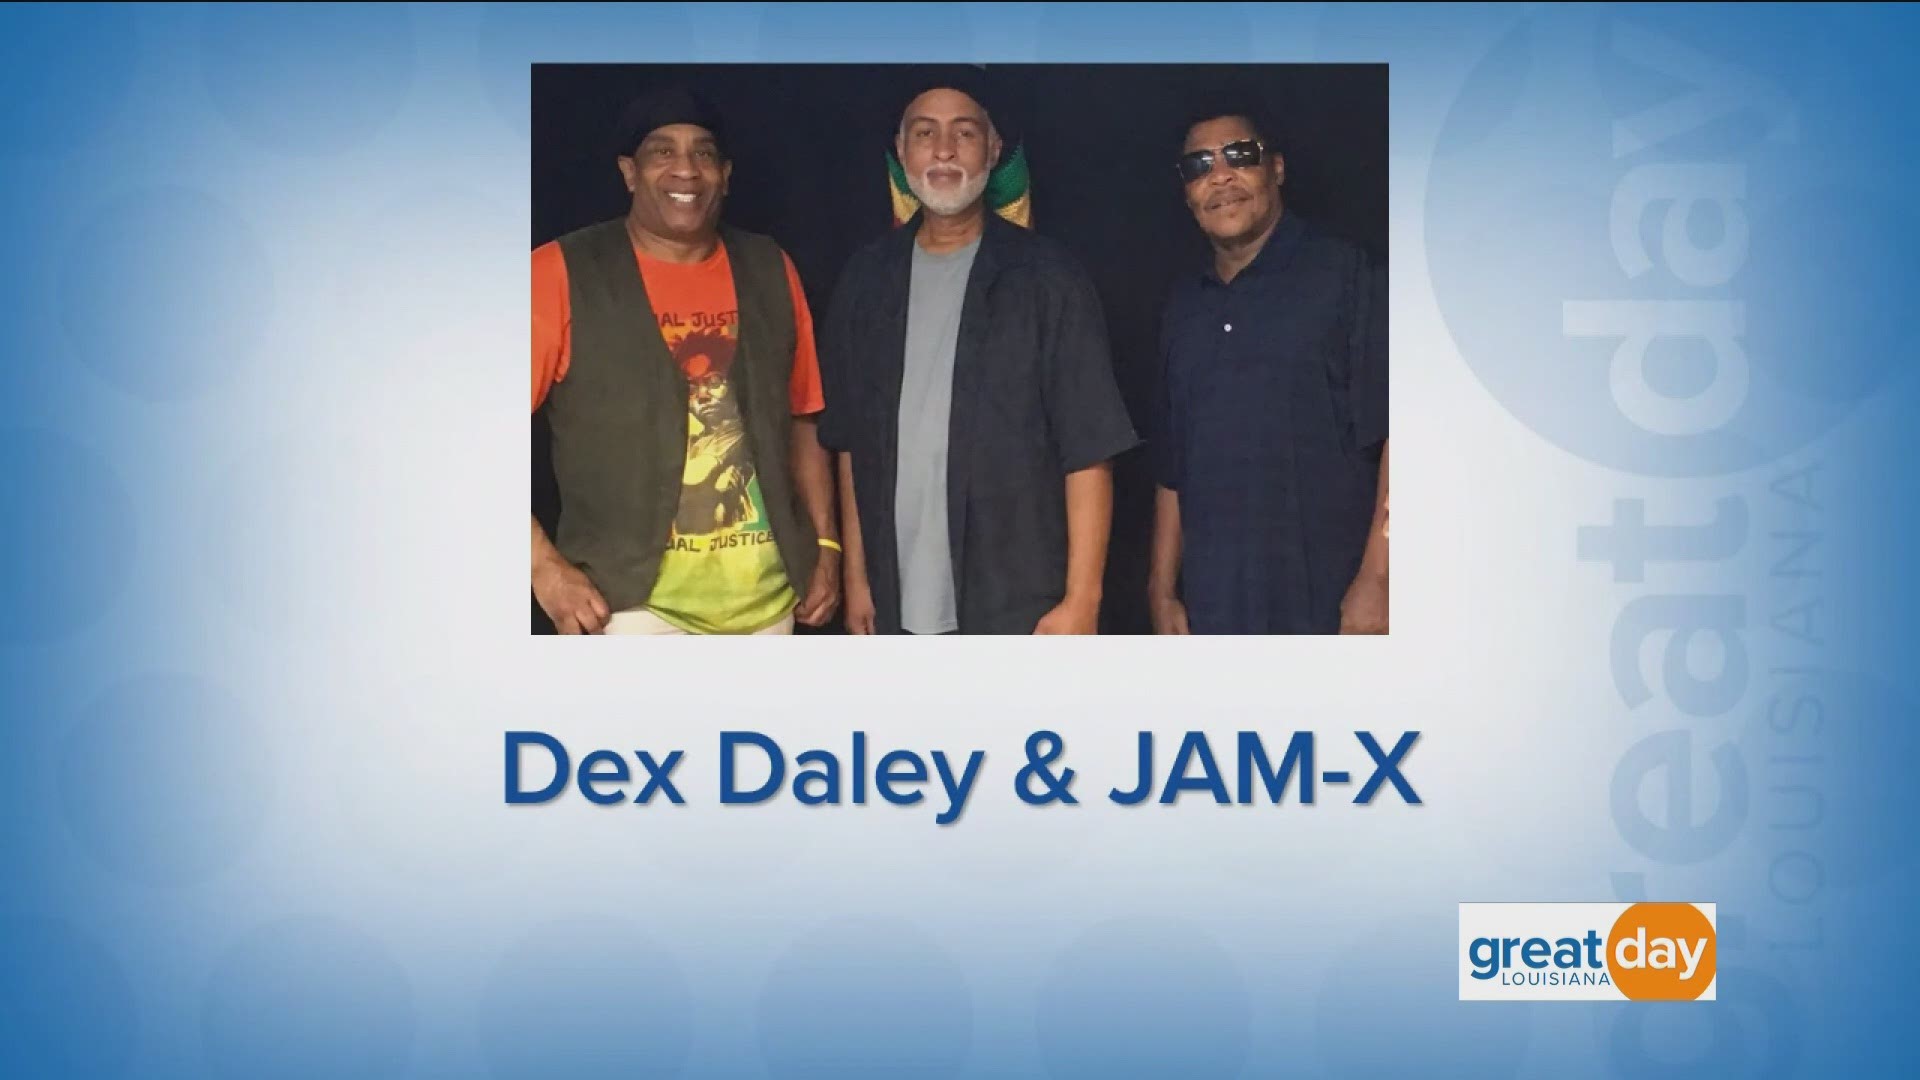 Dex Daley & JAM-X performed "Good Witch" in the Chip Forstall virtual sound stage.